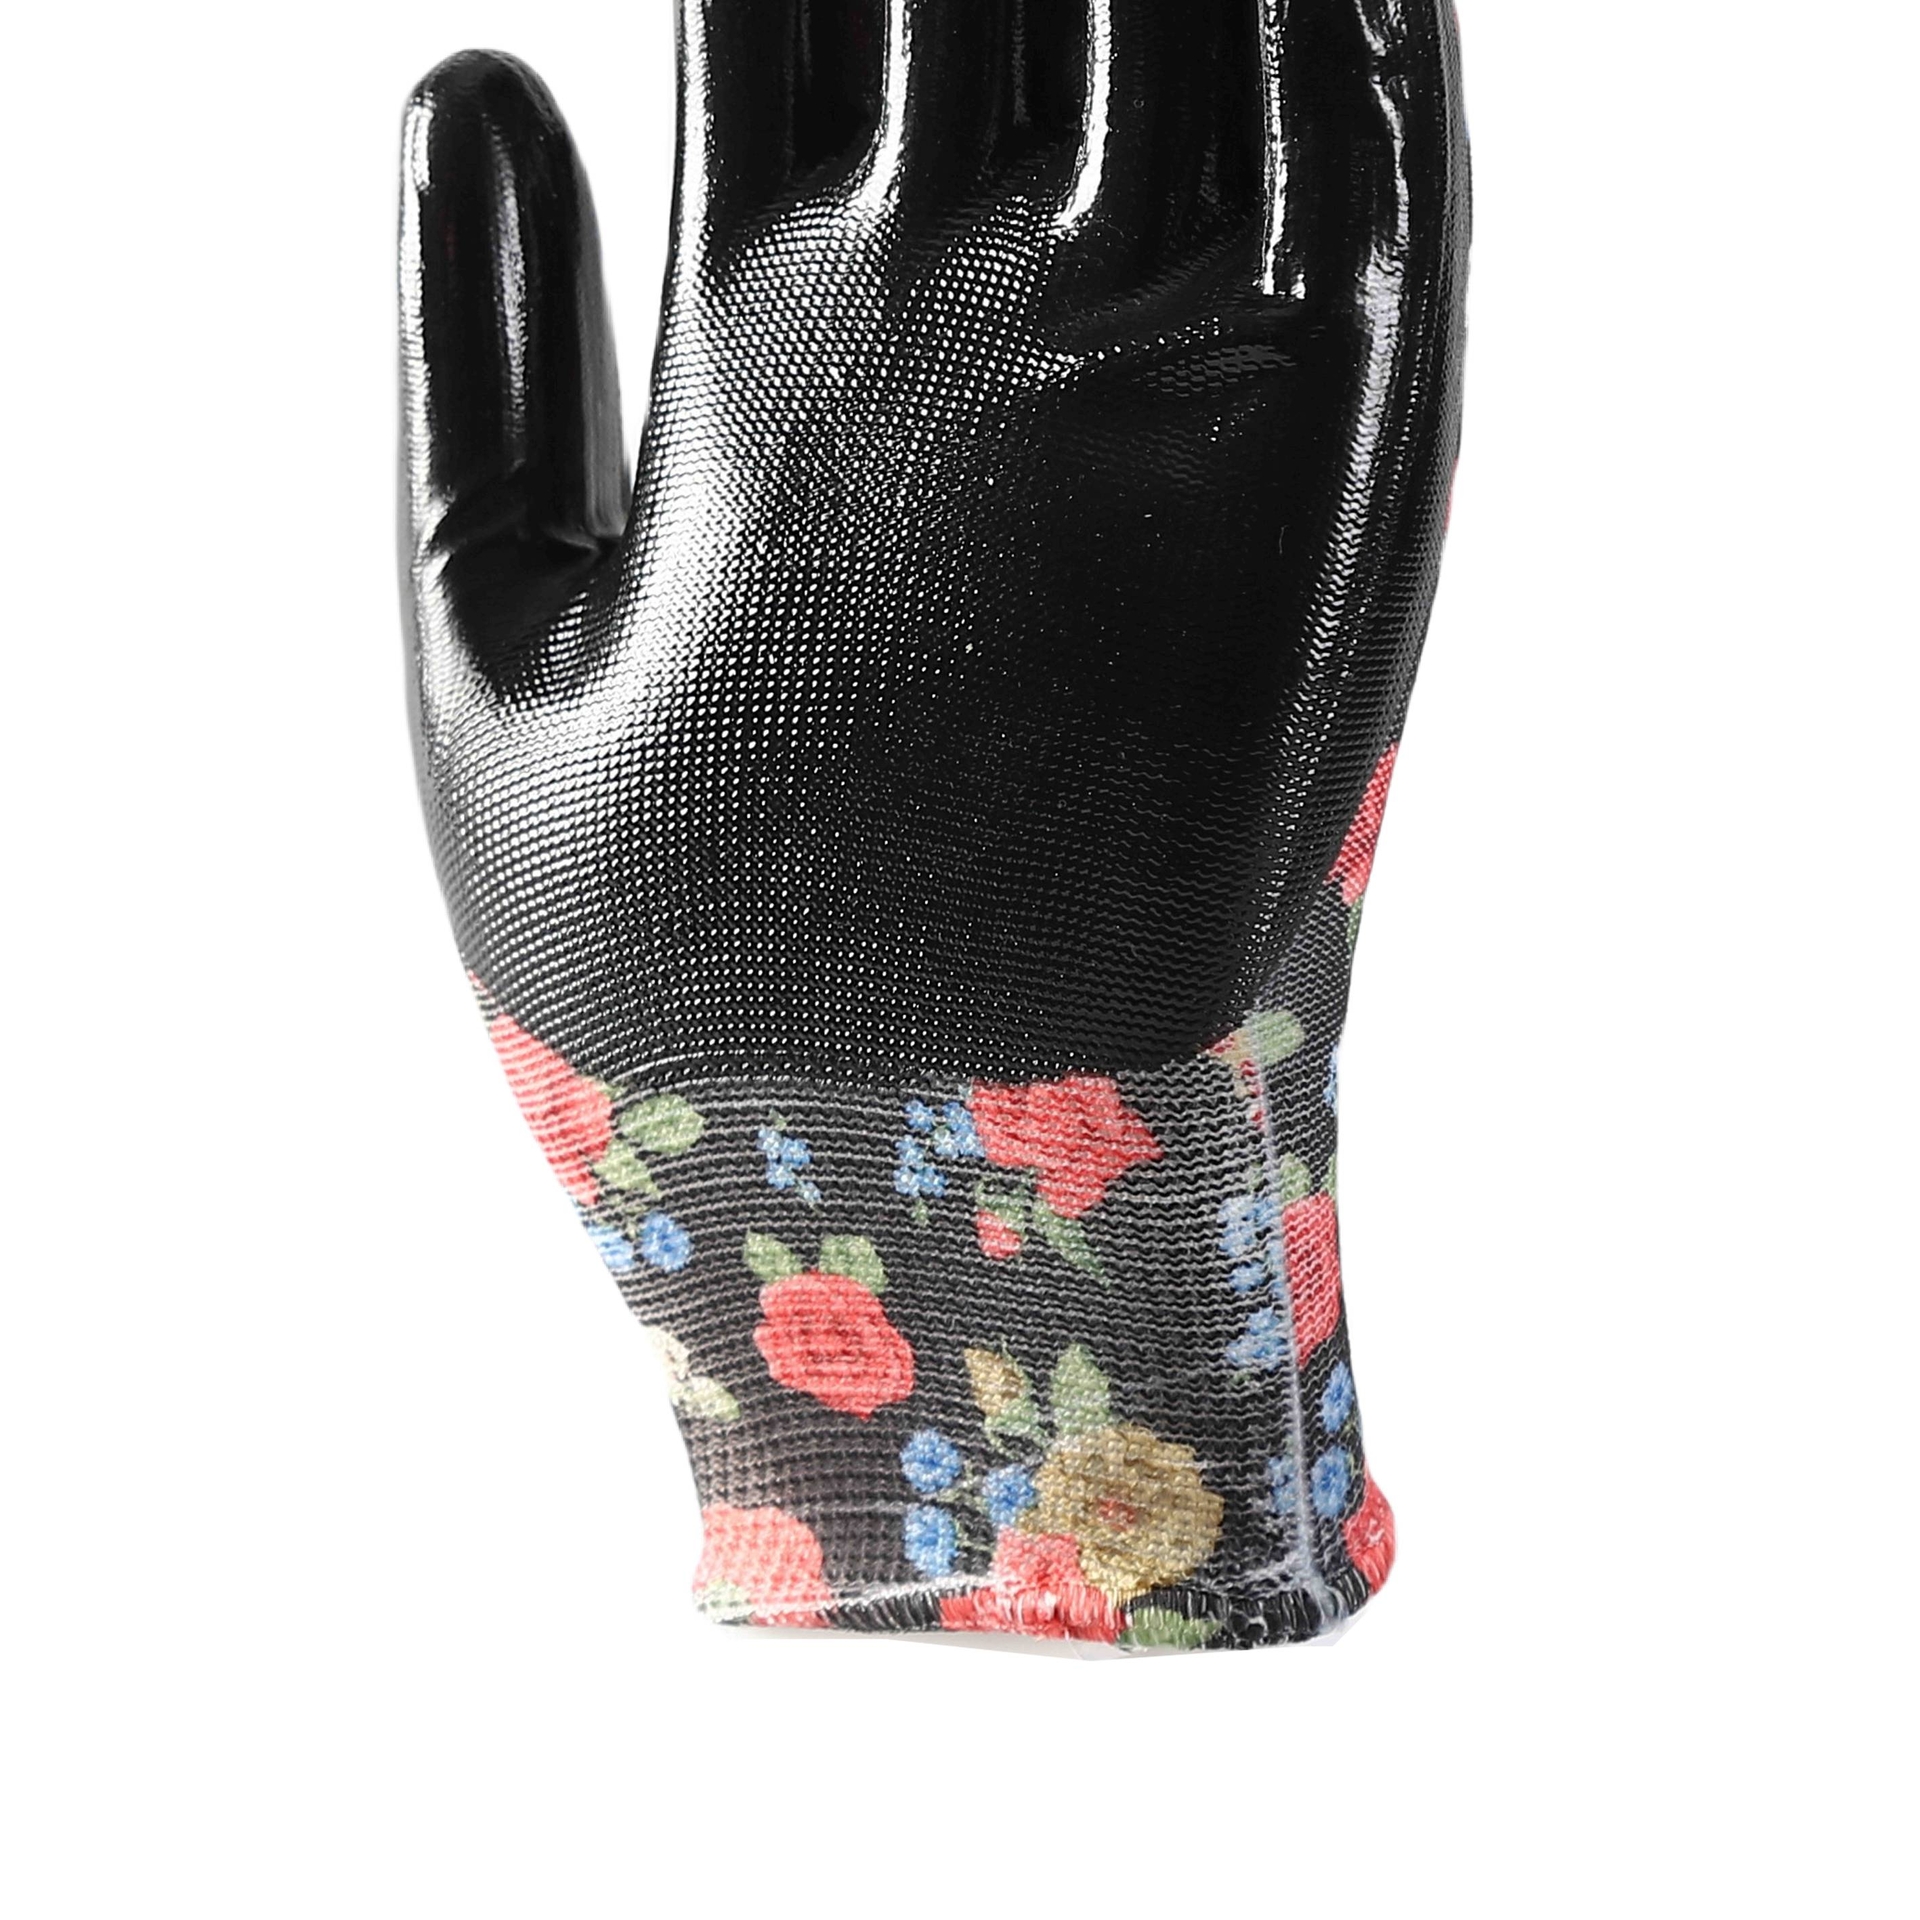                 Printing polyester with black nitrile coating gloves            